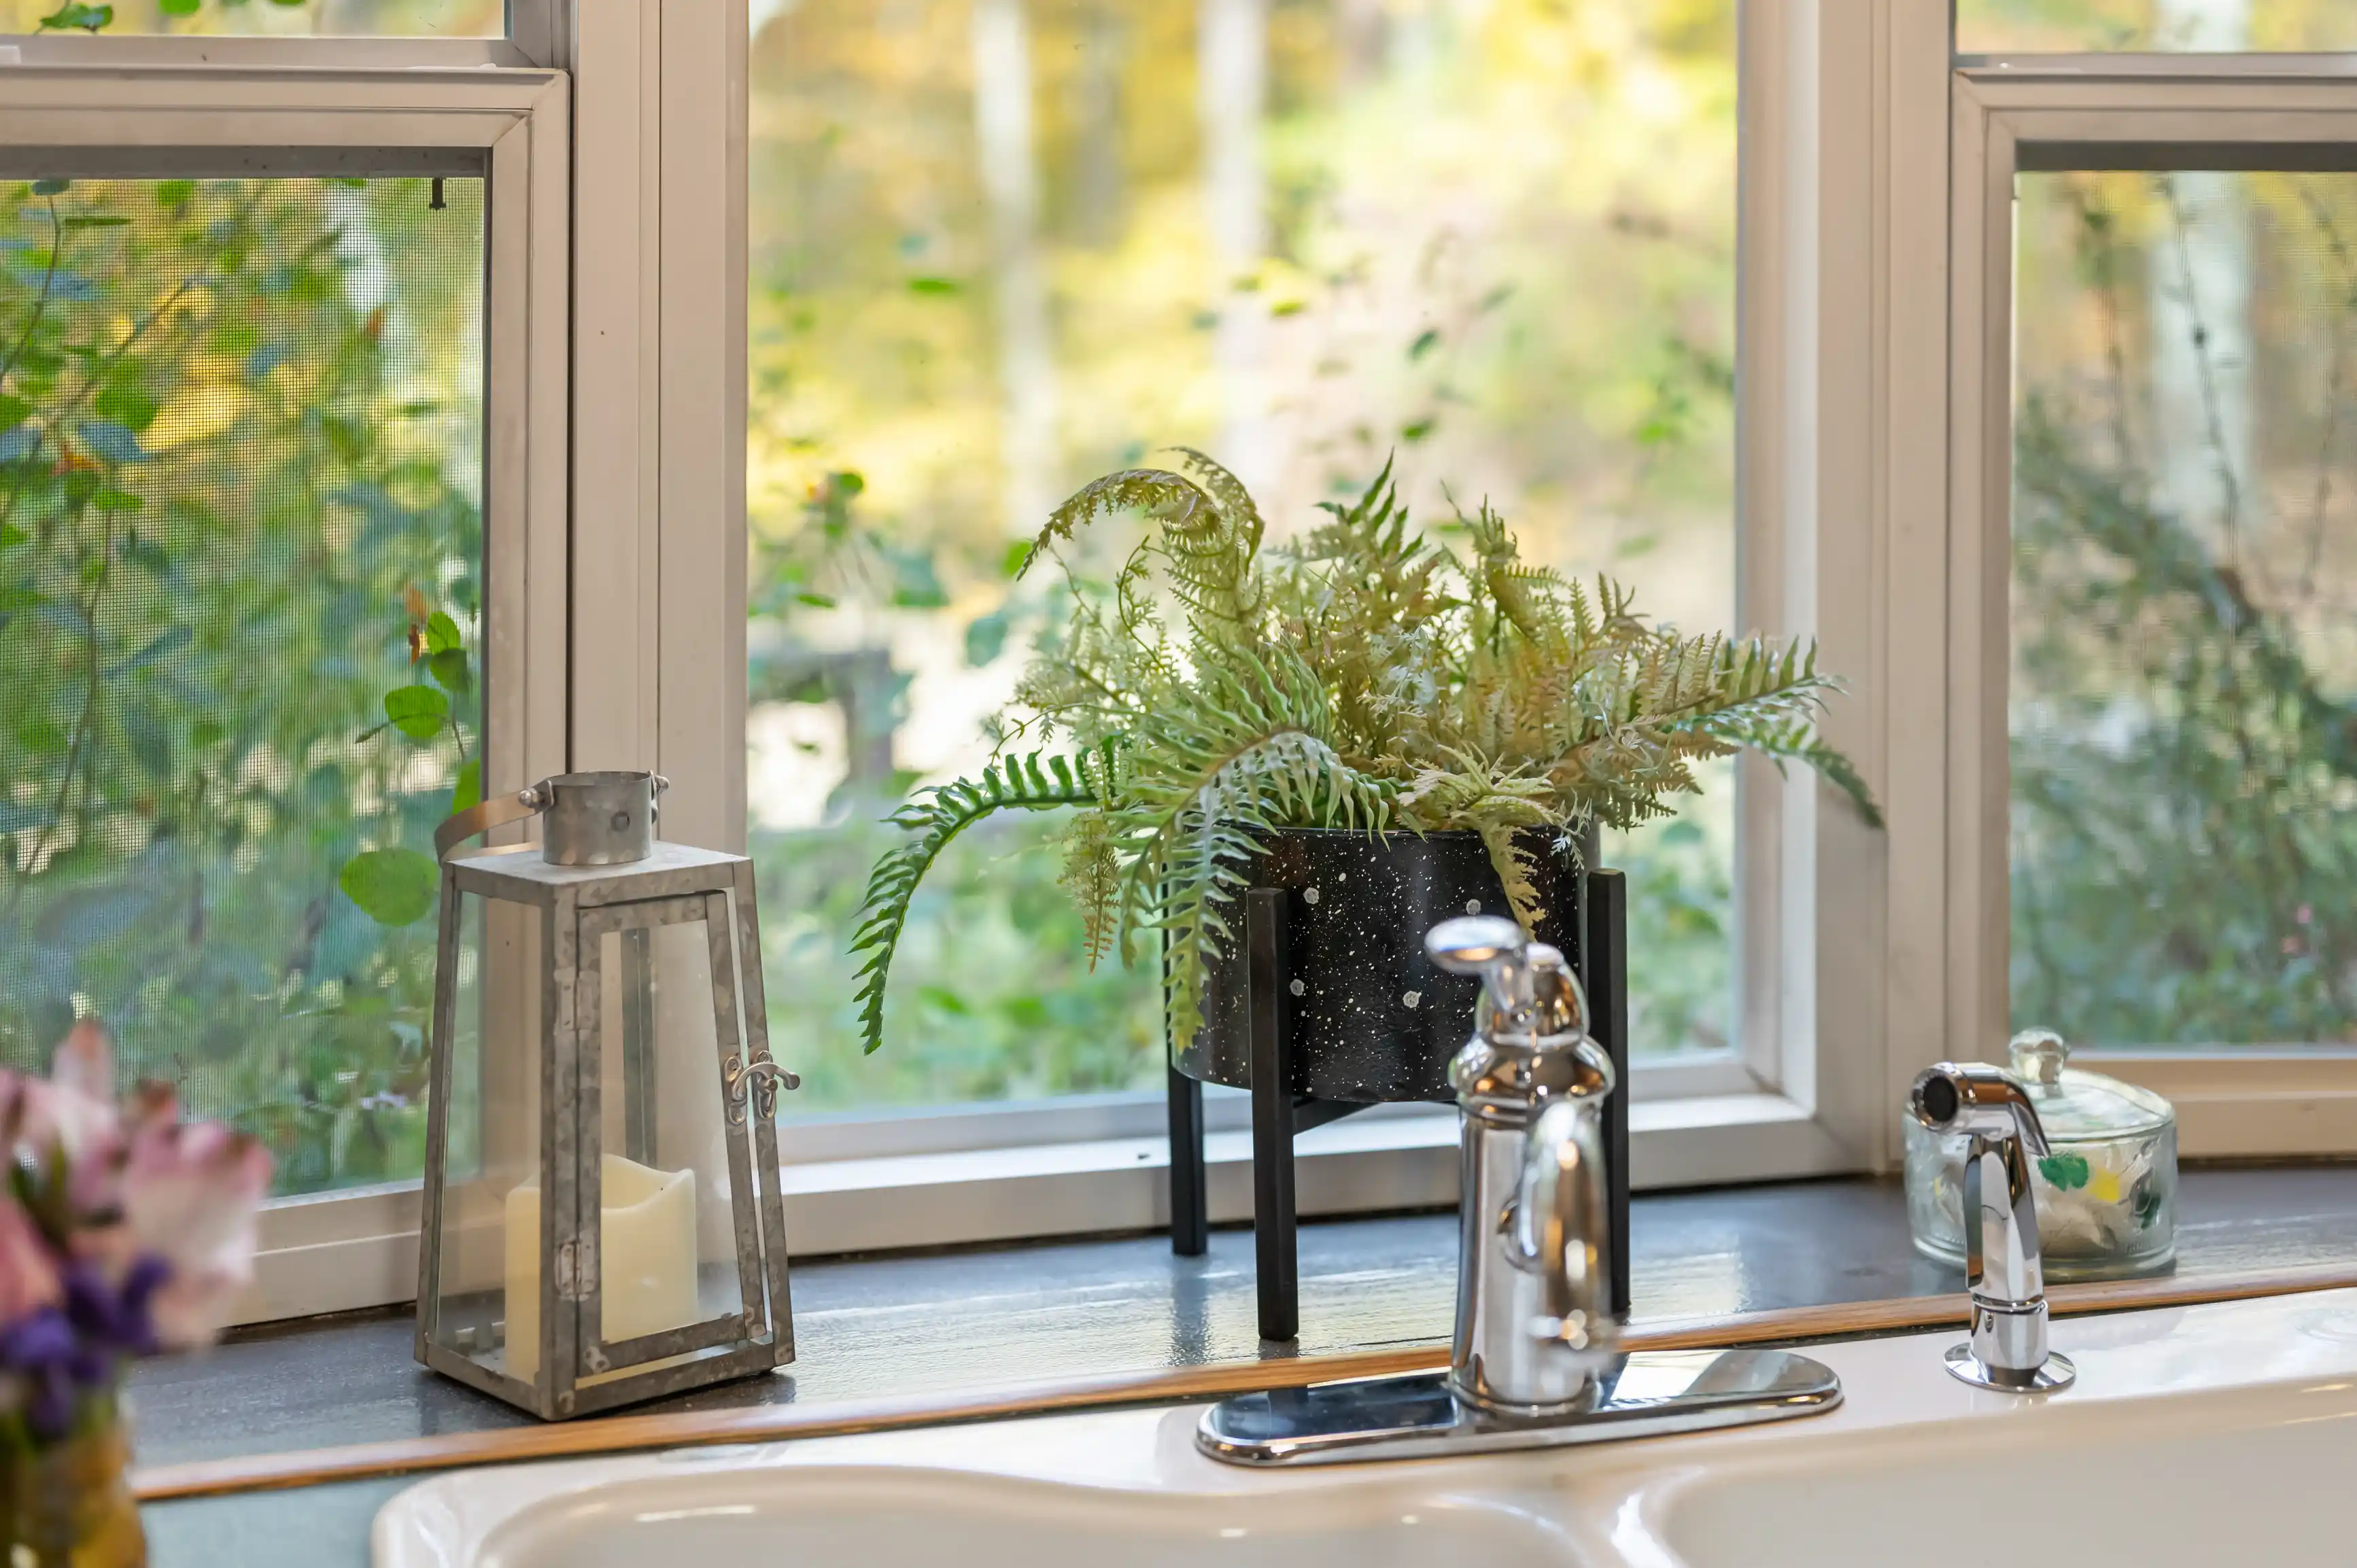 A potted fern on a windowsill with a metal lantern to the left, overlooking a blurred garden view.